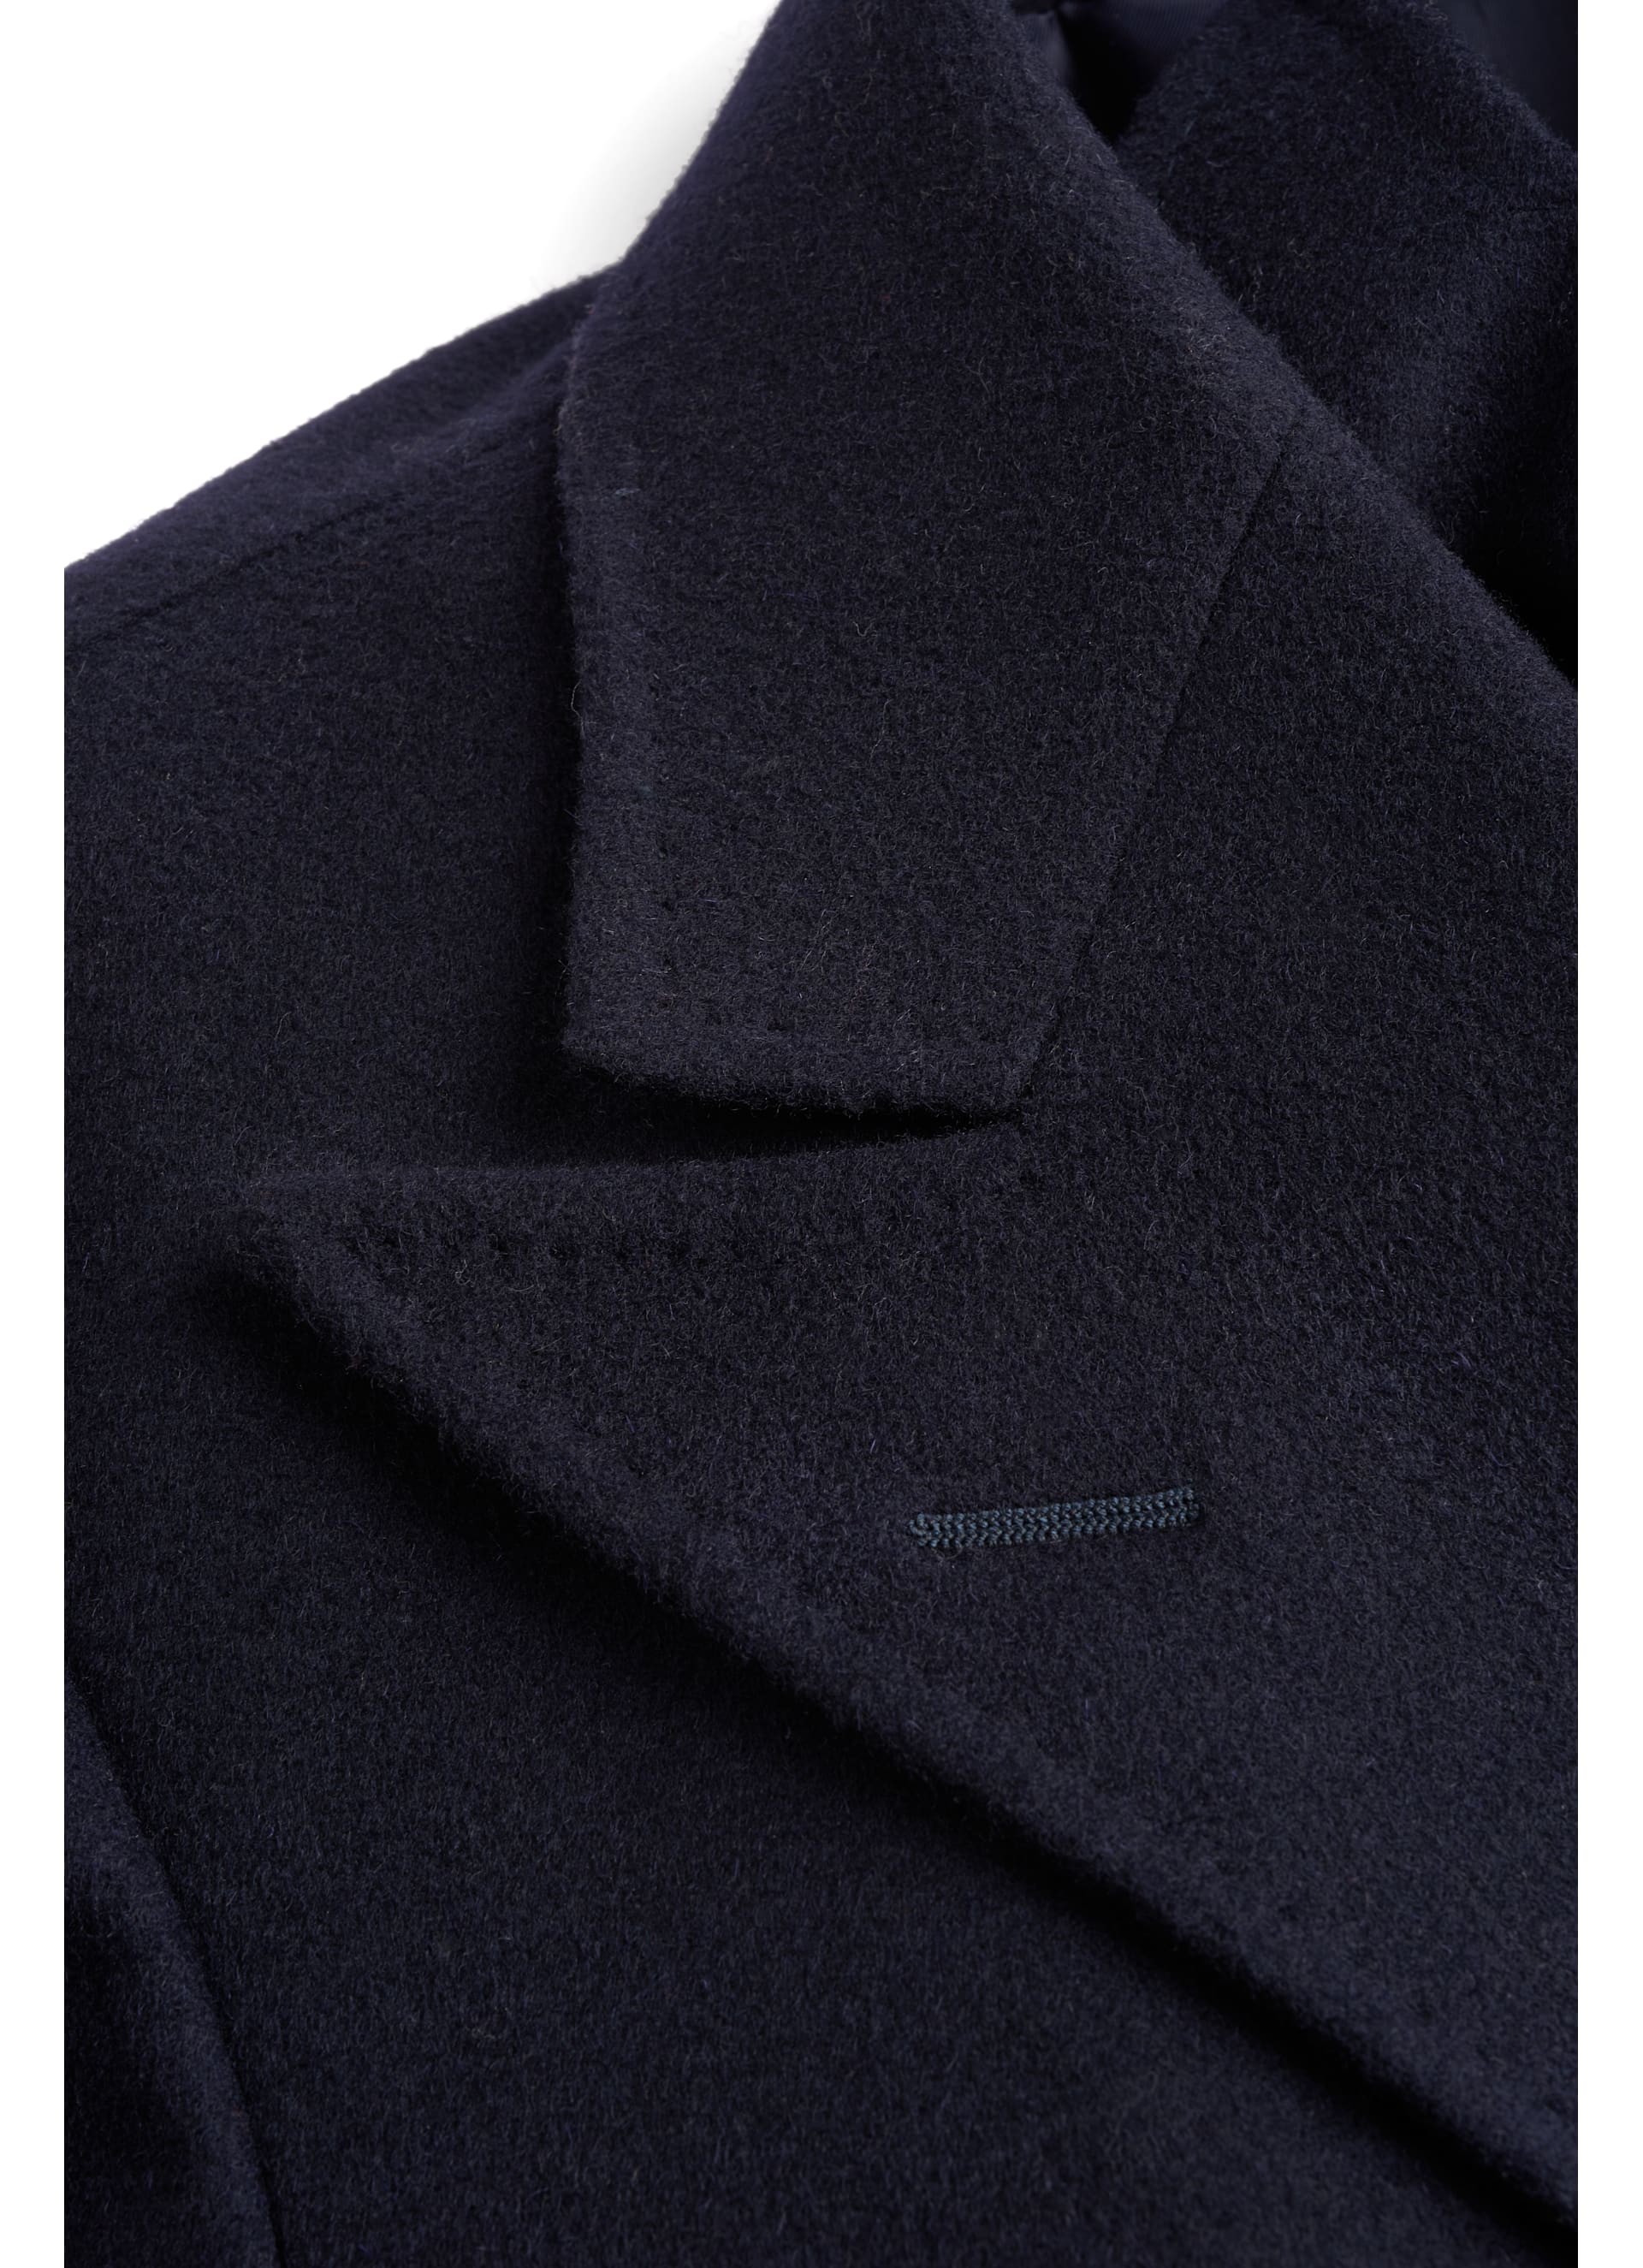 Navy Double Breasted Coat J620i | Suitsupply Online Store